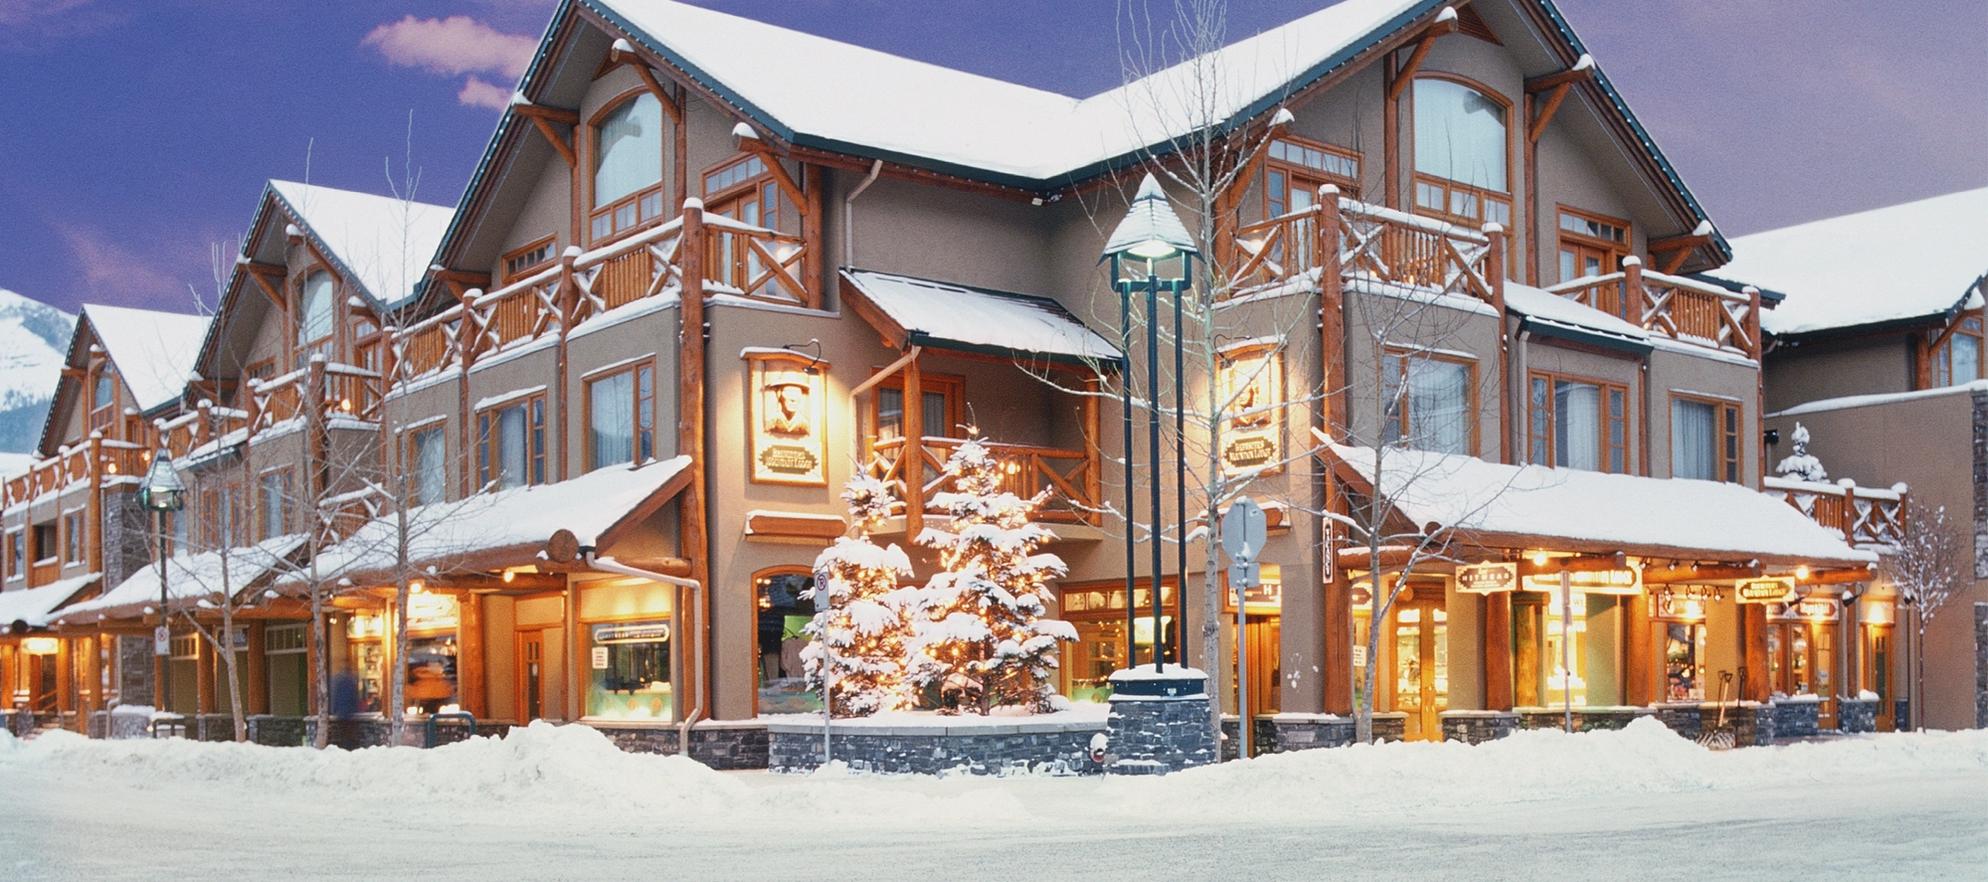 Brewster's Mountain Lodge in Winter